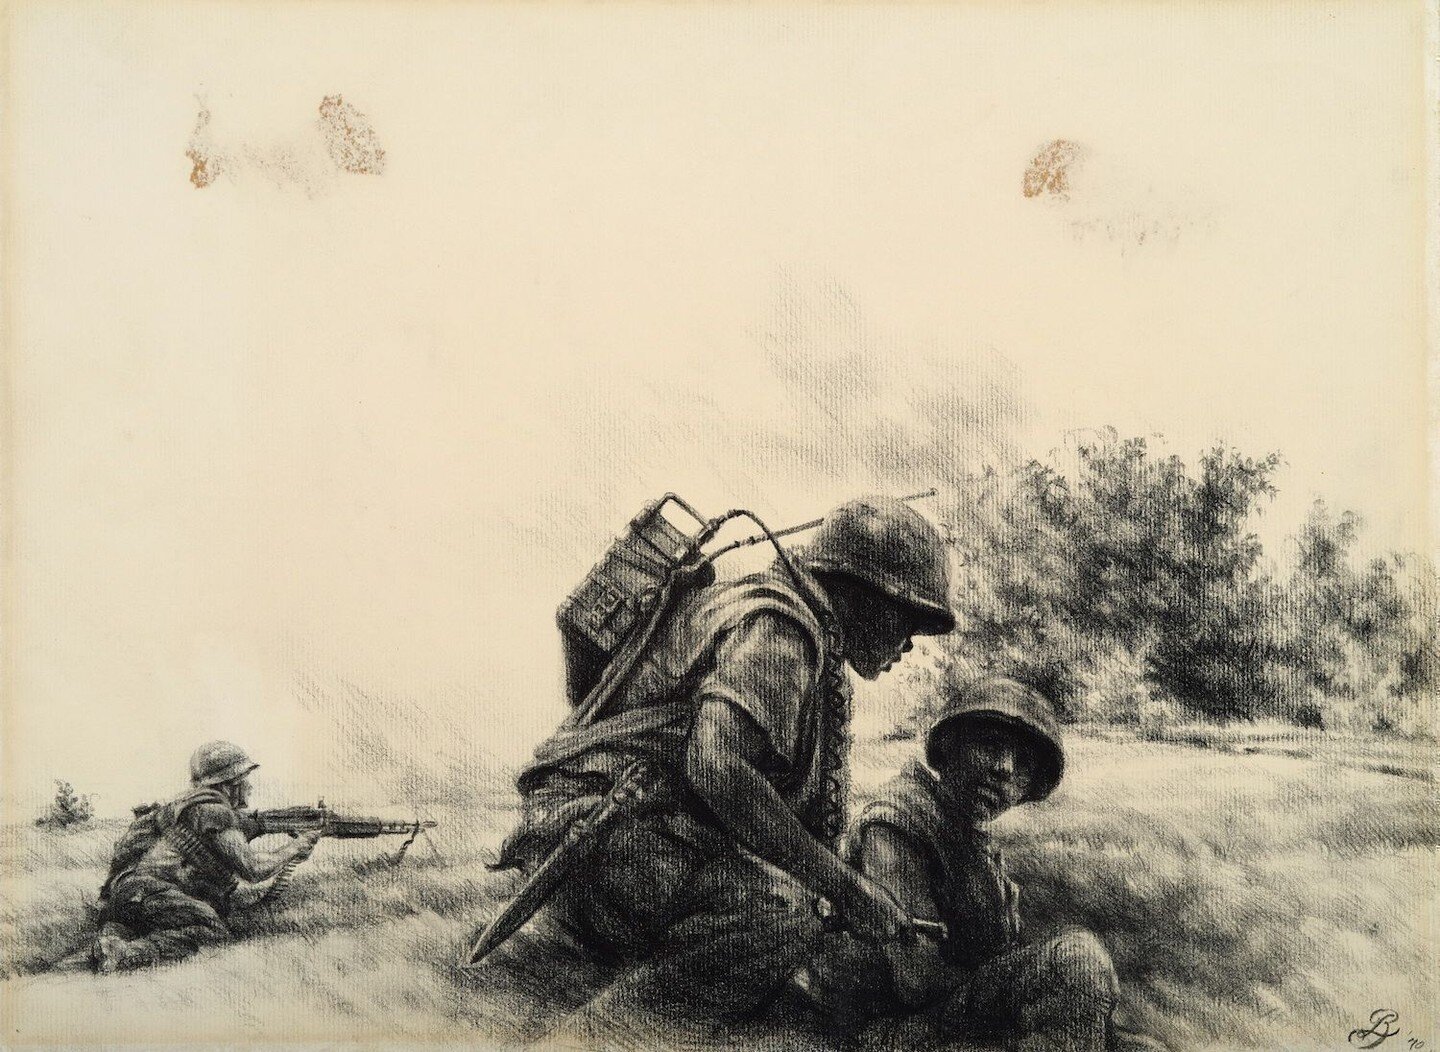 𝚅𝚒𝚎𝚝𝚗𝚊𝚖 𝙲𝚘𝚖𝚋𝚊𝚝 𝙰𝚛𝚝 
.
🔁Via @usmccombatart

&ldquo;This pen drawing is from my experience as platoon commander when we were caught under fire.&rdquo; @bfl.iv_studios , Vietnam combat artist.
.
.
.__________
.
Archived within the @usmc